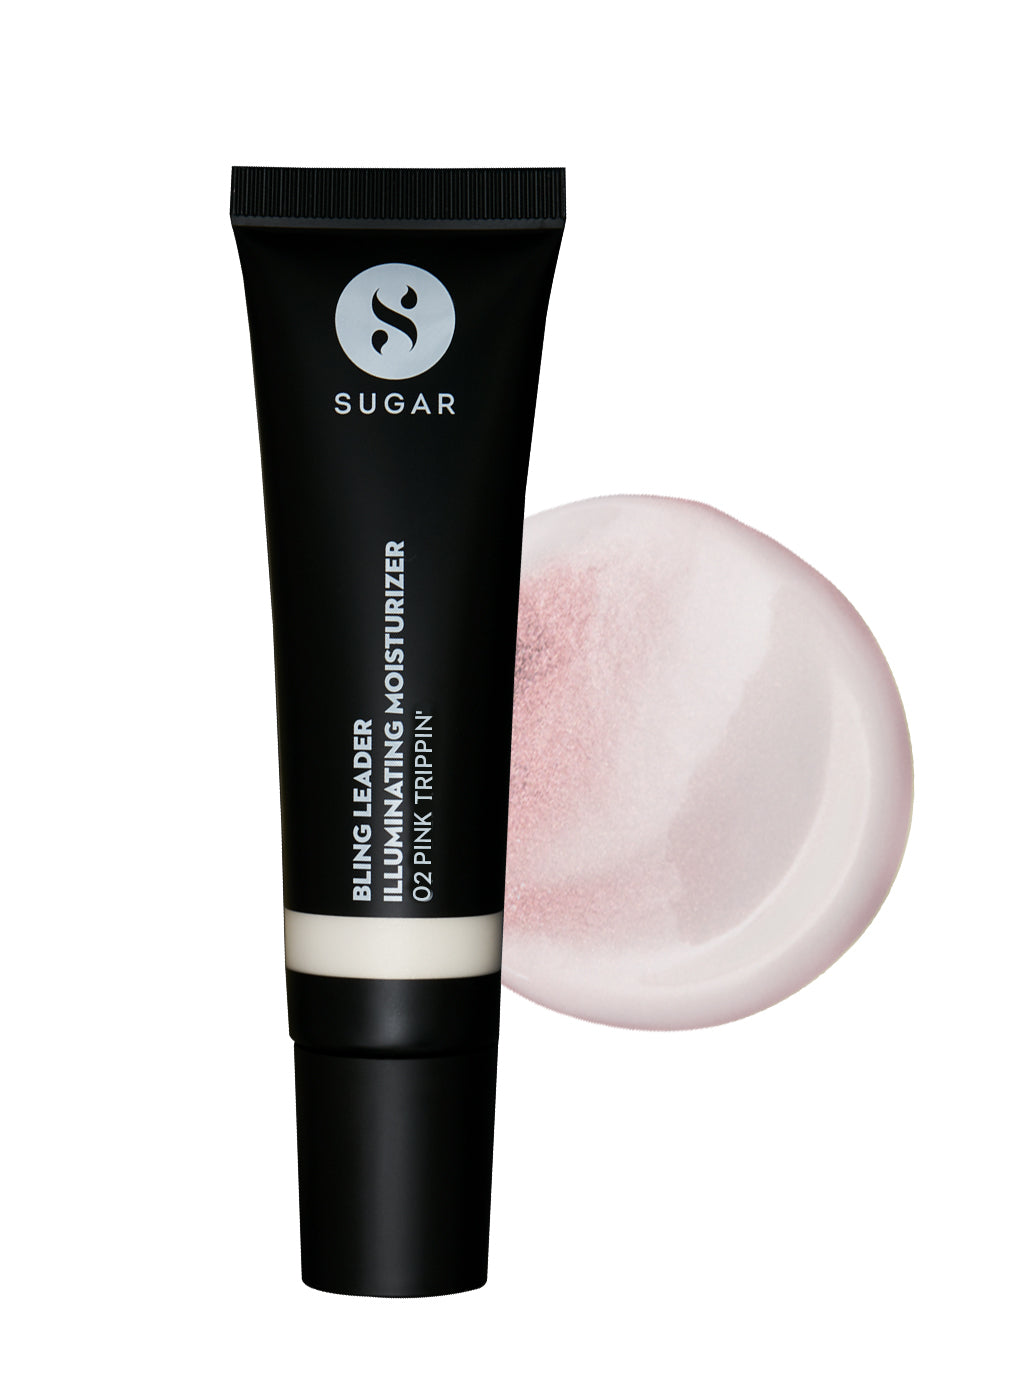 SUGAR Bling Leader Illuminating Moisturizer - 02 Pink Trippin' - Cool pink with a pearl finish